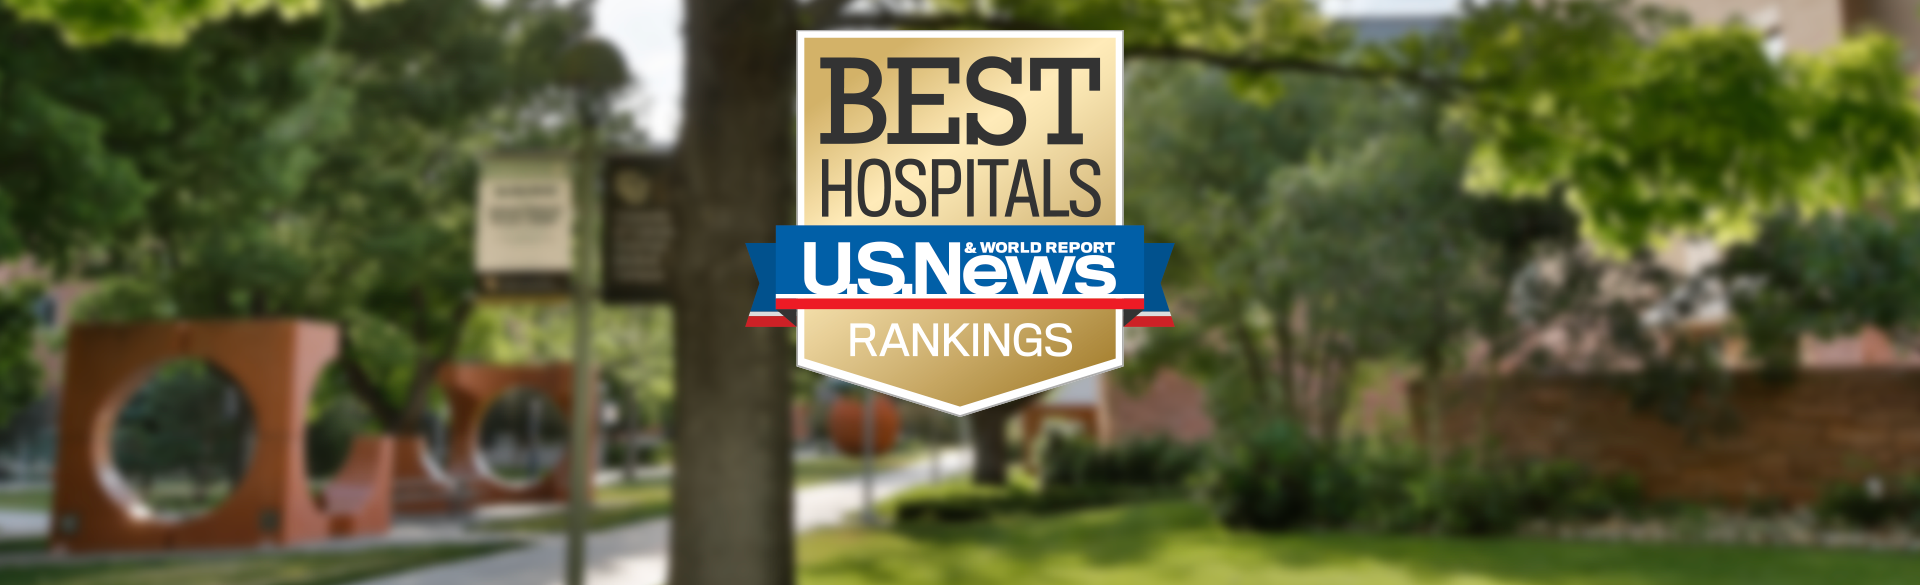 Voting for U.S. News & World Report Hospitals Ranking